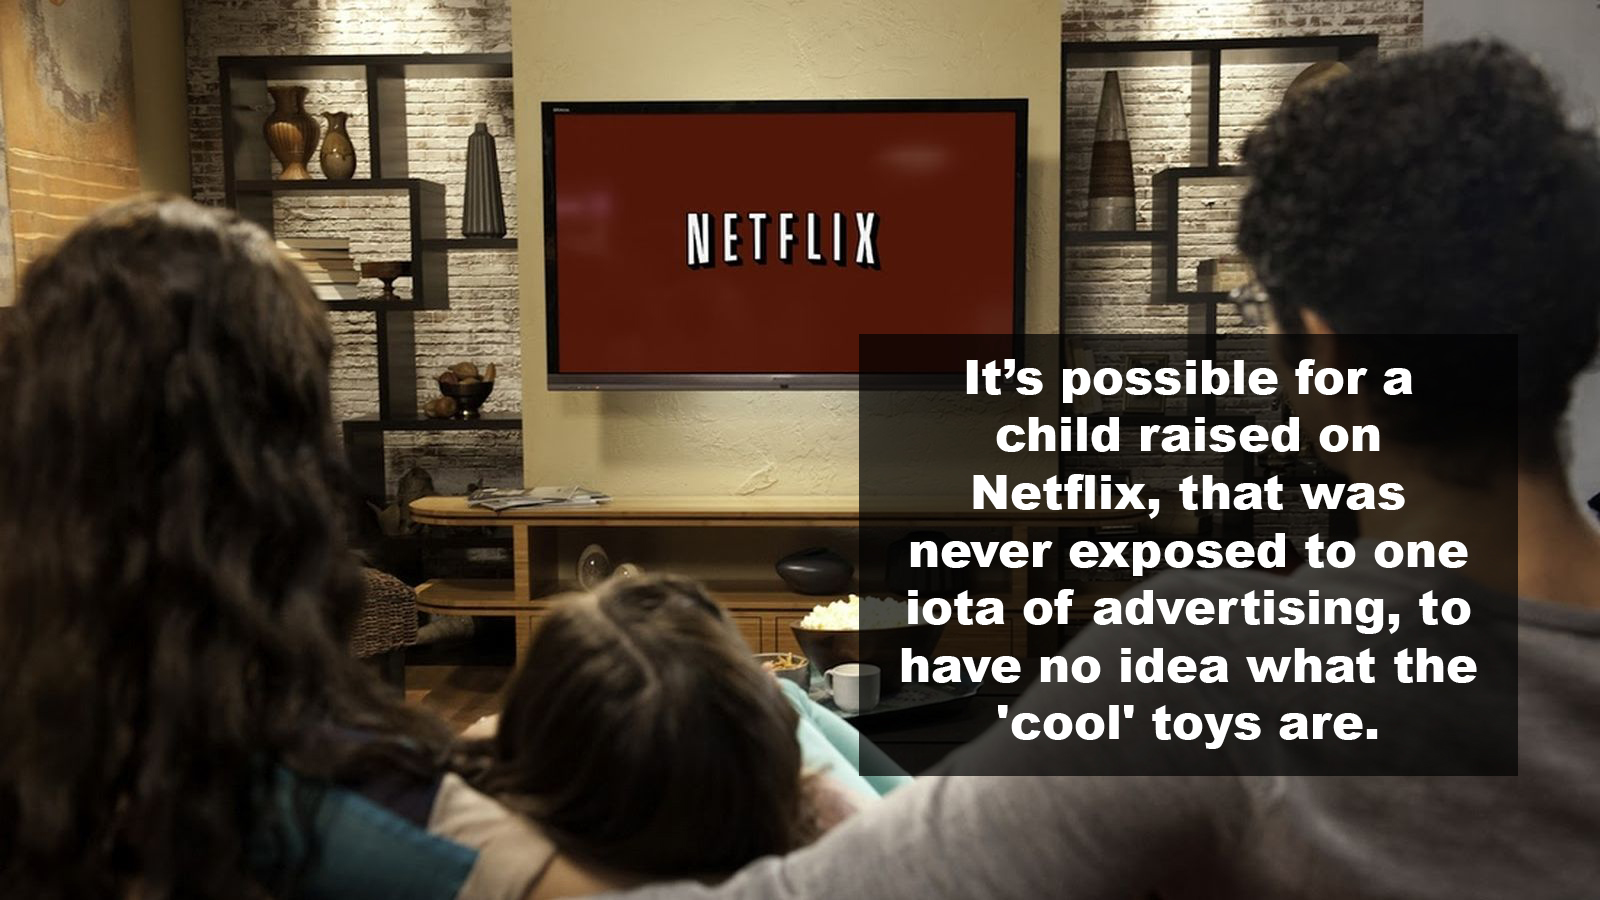 netflix customer - Netflix It's possible for a child raised on Netflix, that was never exposed to one iota of advertising, to have no idea what the 'cool' toys are.